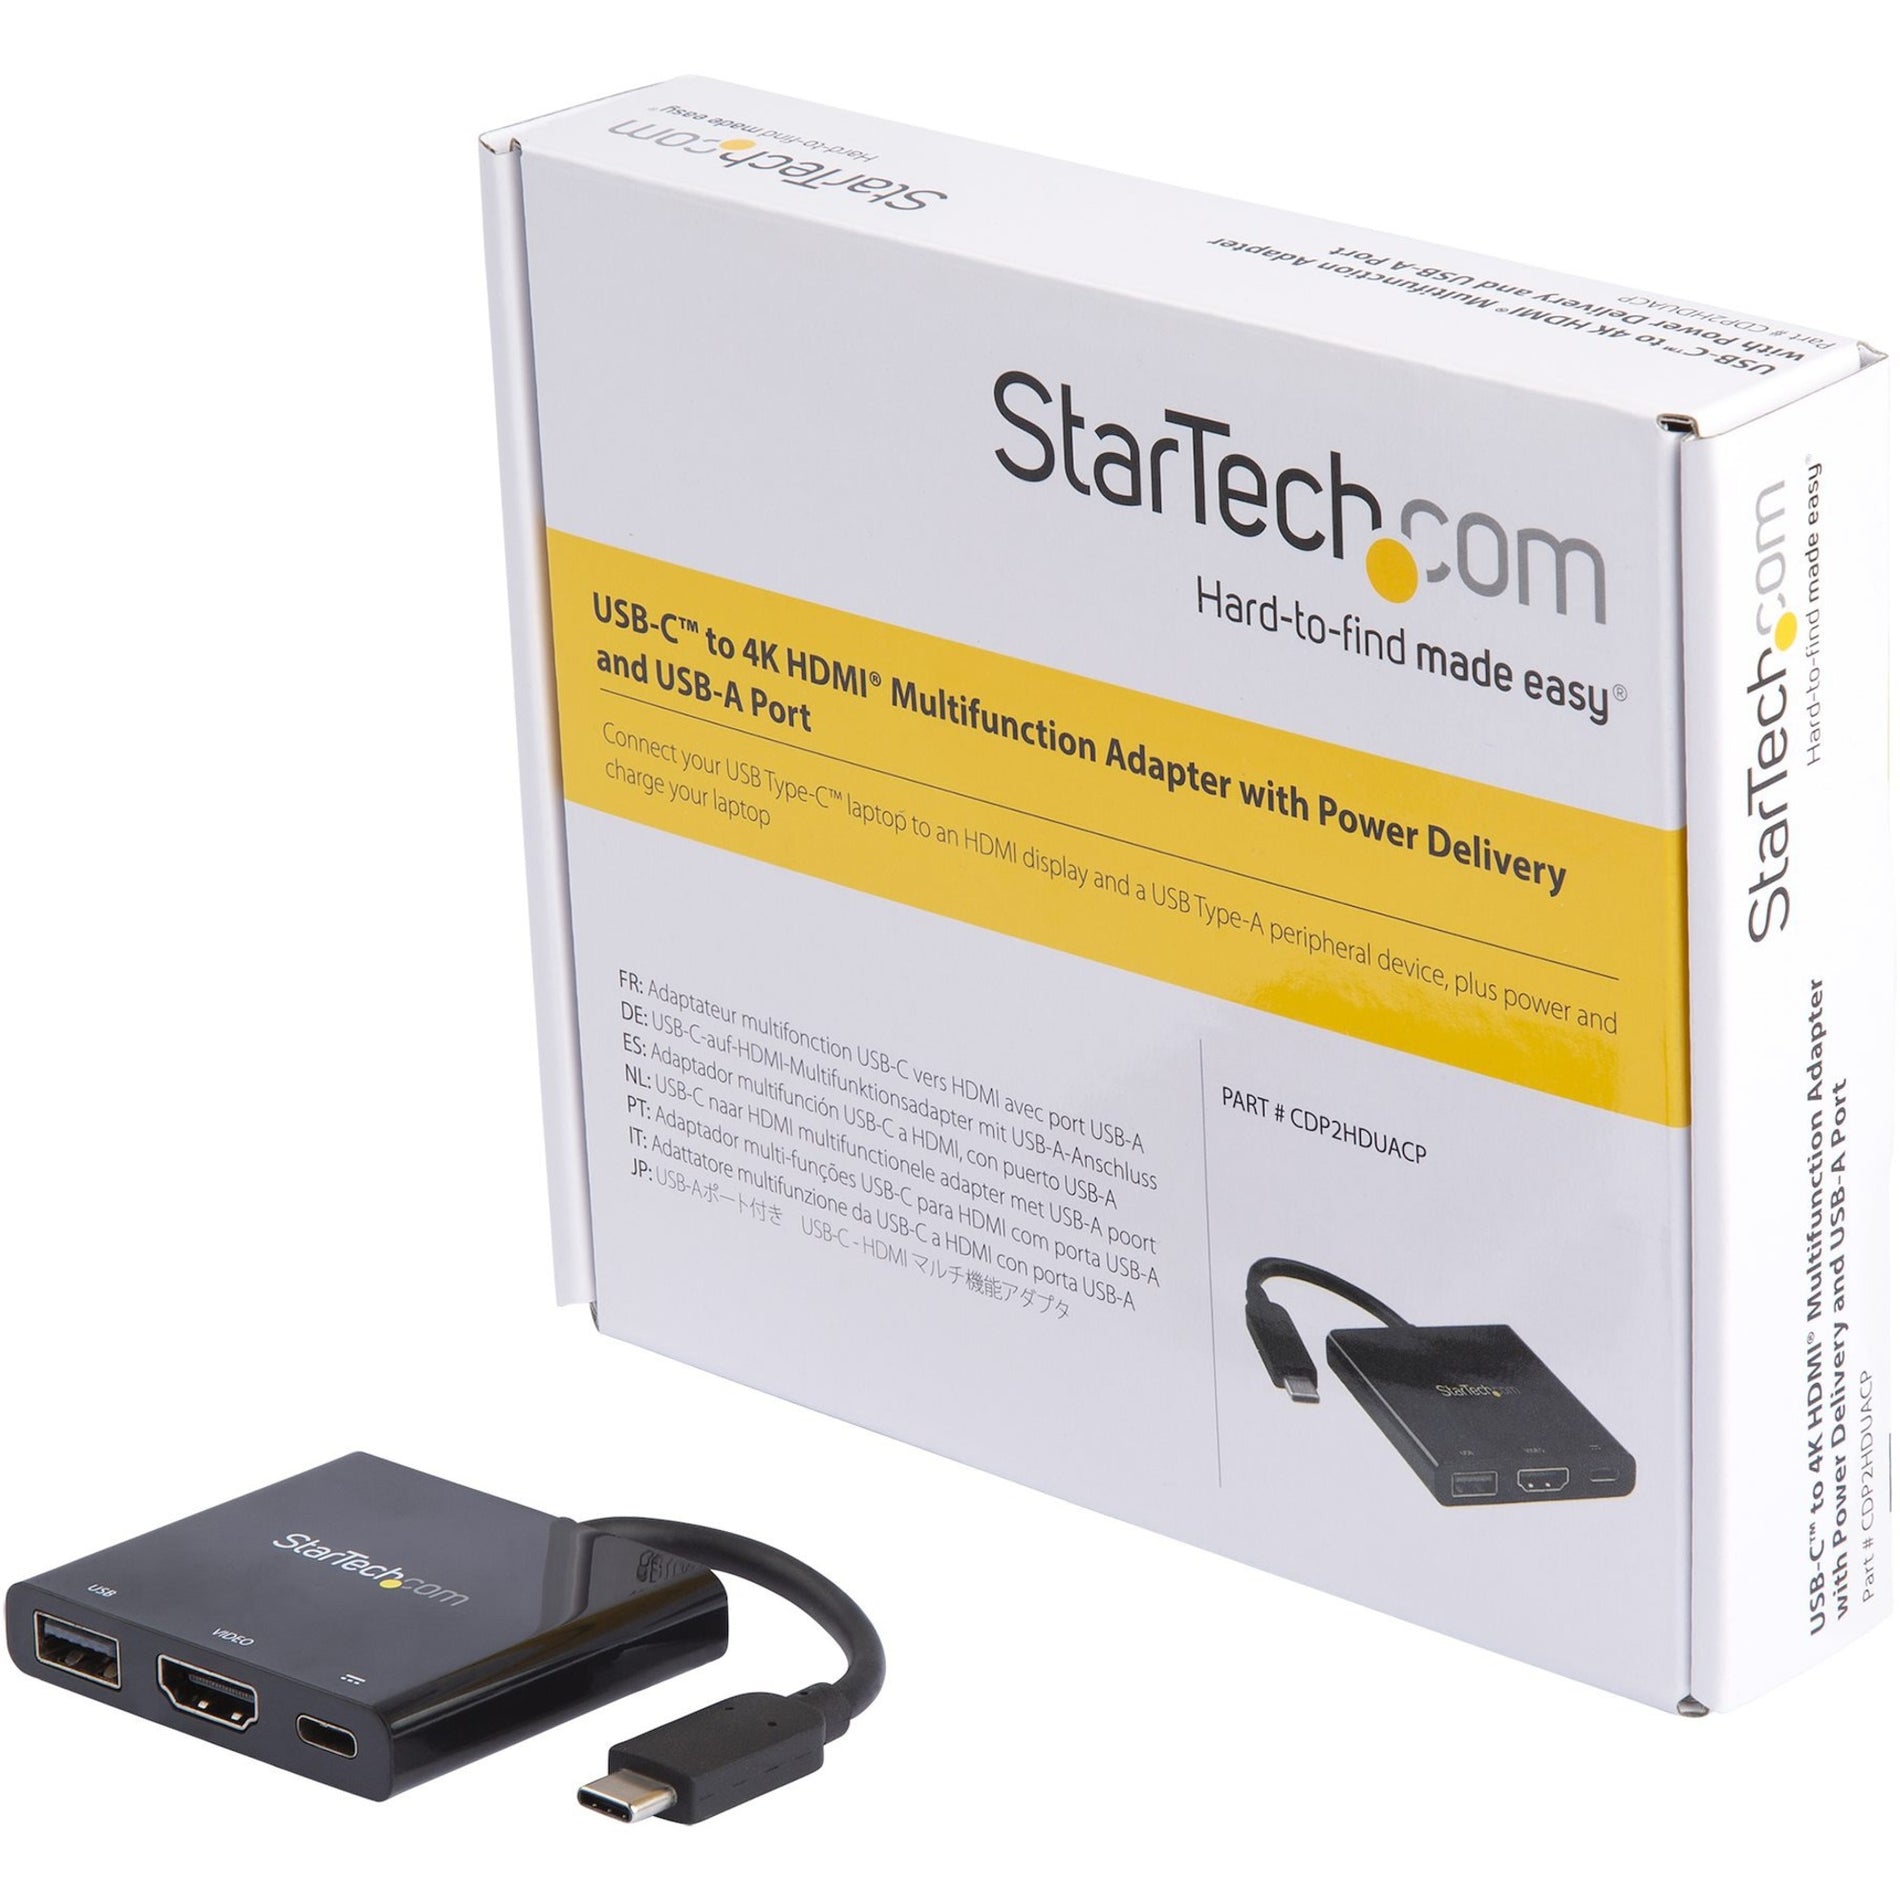 StarTech.com CDP2HDUACP USB-C to 4K HDMI Multifunction Adapter - USB Type-C to HDMI, USB-A Port, Power Delivery - USB C Laptop Travel Adapter